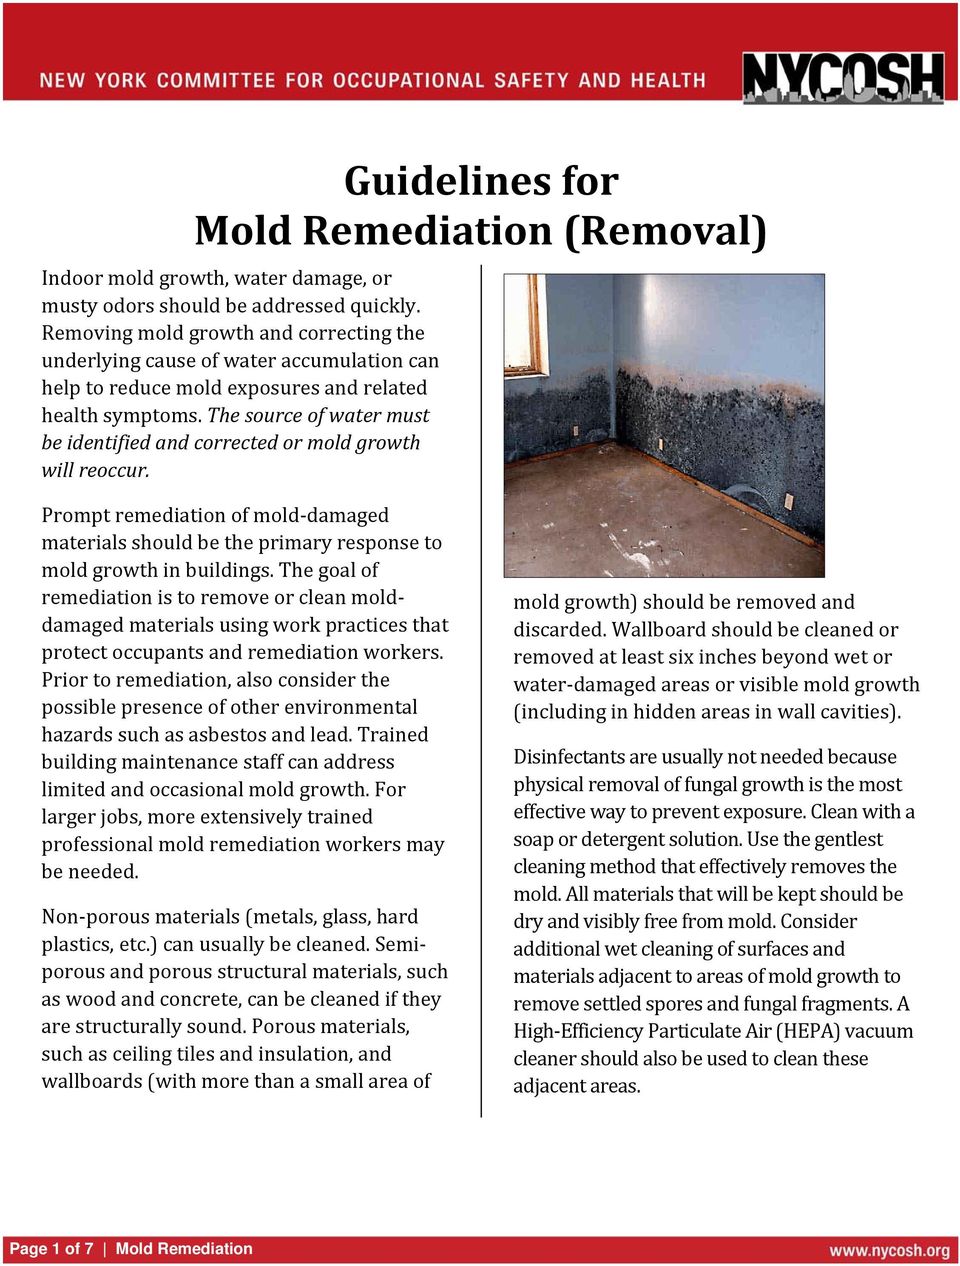 The source of water must be identified and corrected or mold growth will reoccur. Prompt remediation of mold damaged materials should be the primary response to mold growth in buildings.